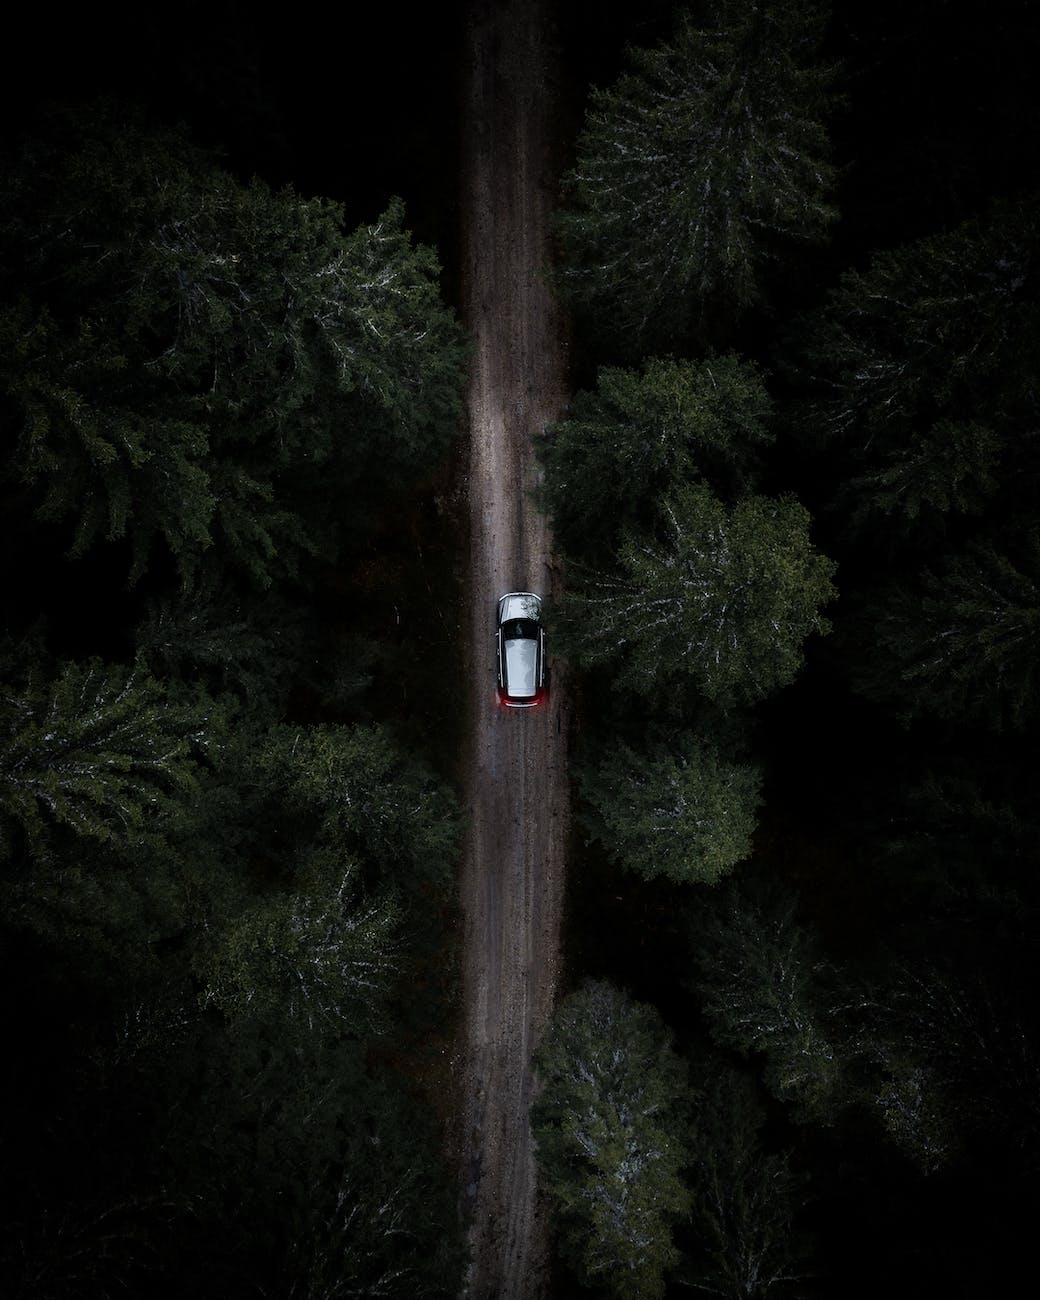 white and black car on road in between green trees